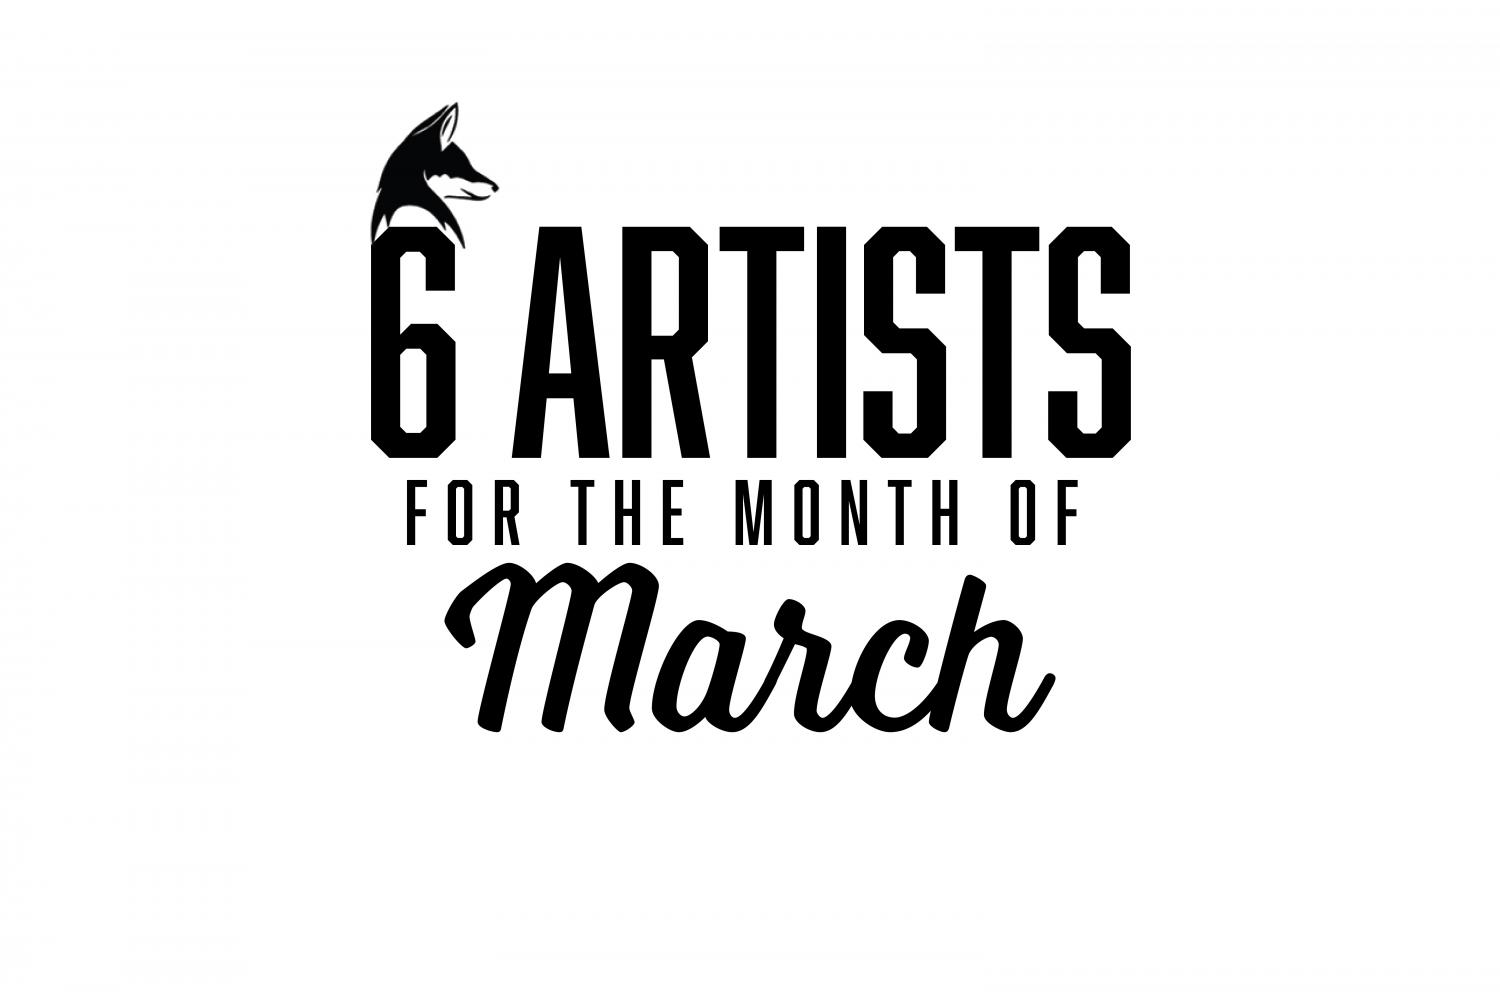 Six Artists You Should Be Listening To: March 2021 EDITION